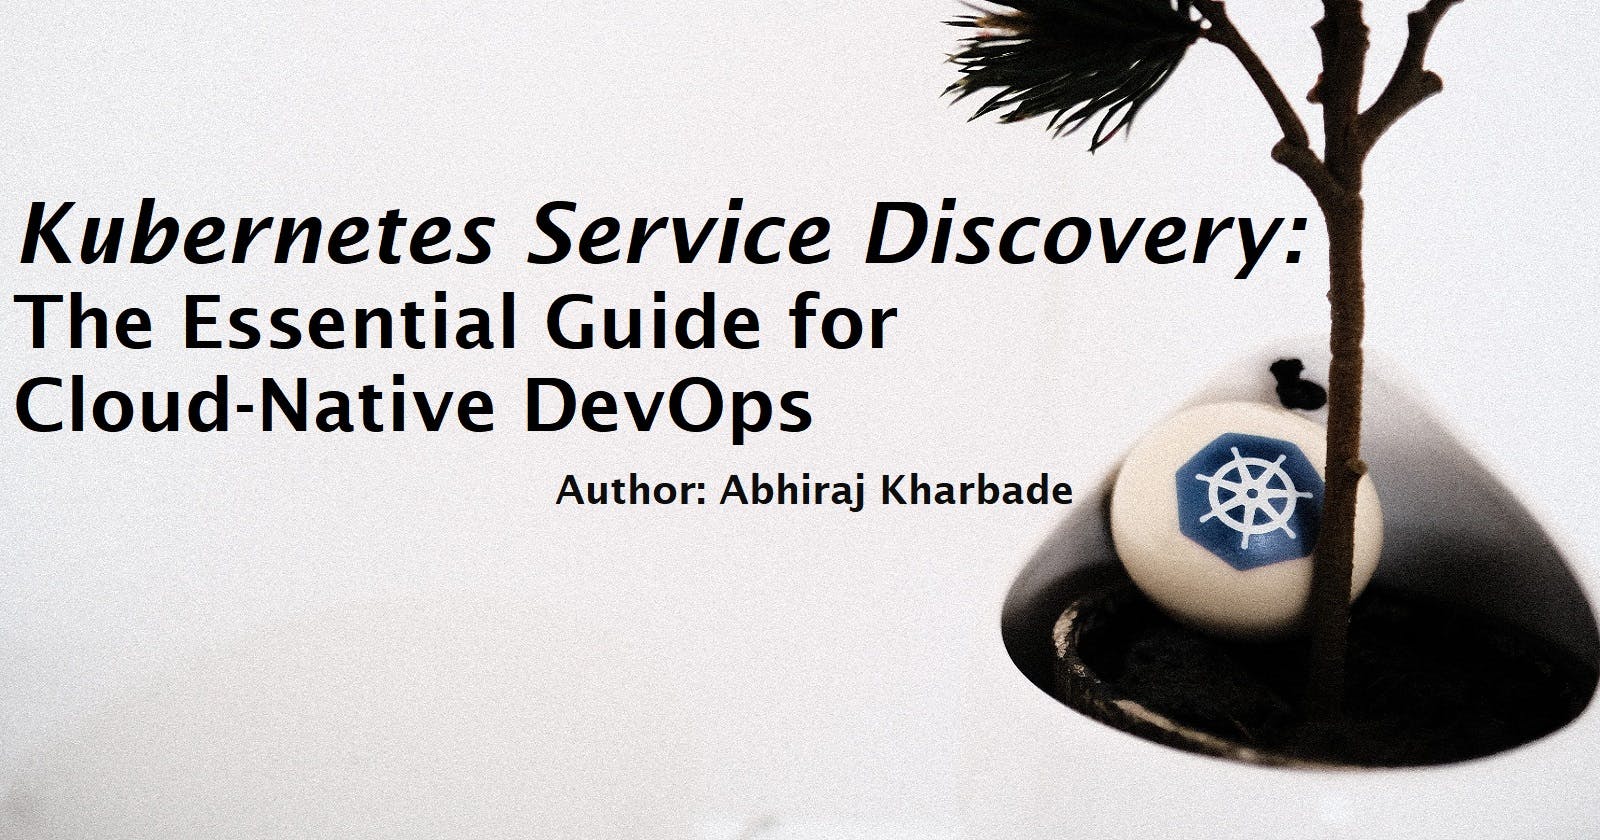 Kubernetes Service Discovery: The Essential Guide for Cloud-Native DevOps